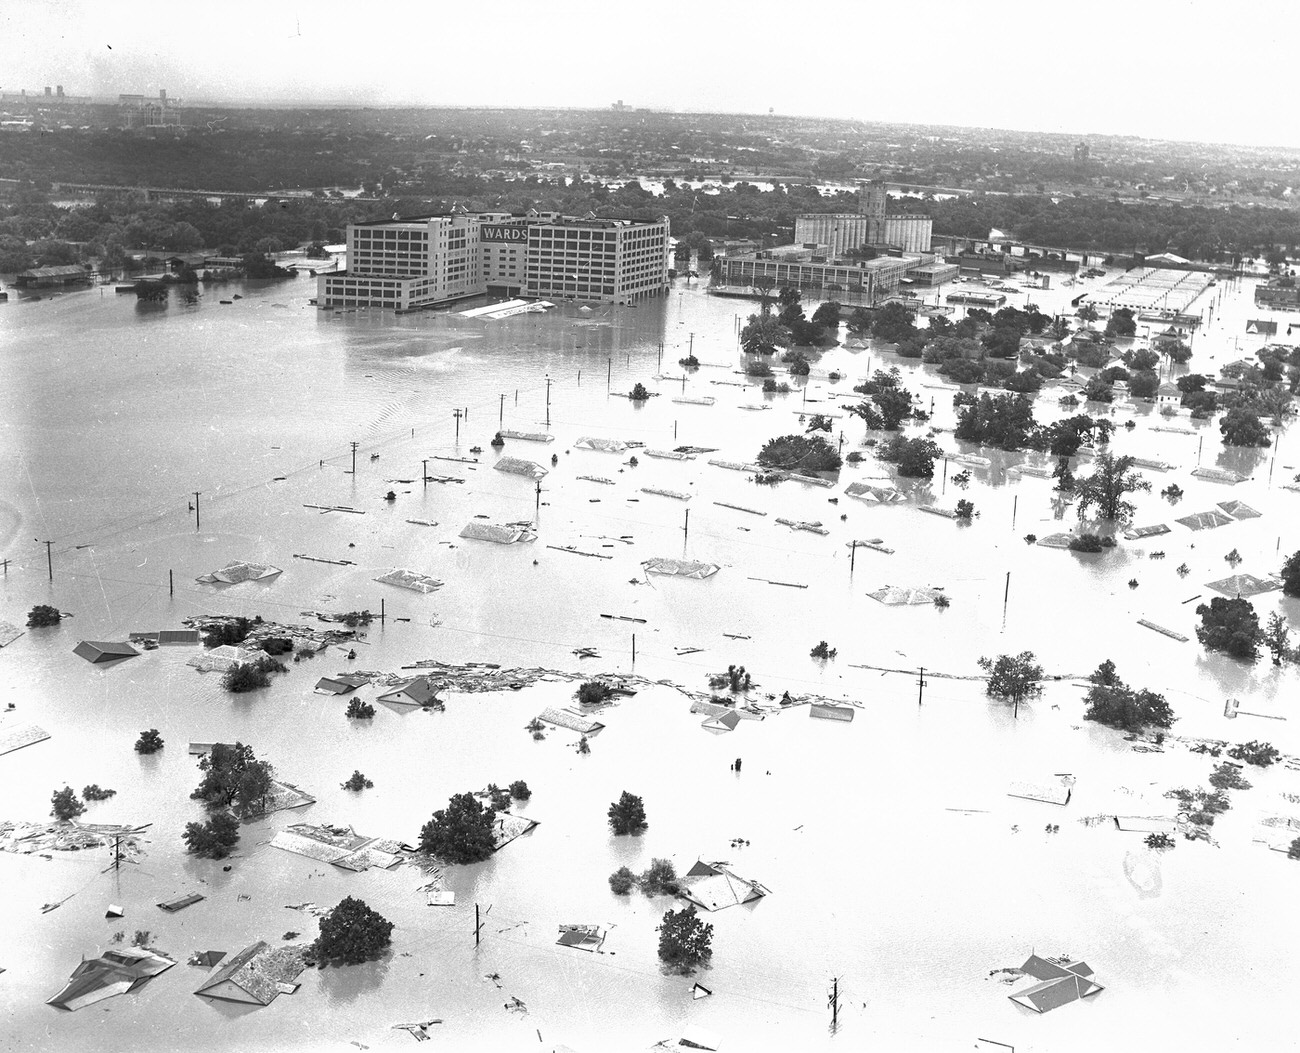 Fort Worth, Texas, flood of 1949, showing 7th Street under water. The large Montgomery Ward building received extensive damage. Downtown Fort Worth is visible in the distance.